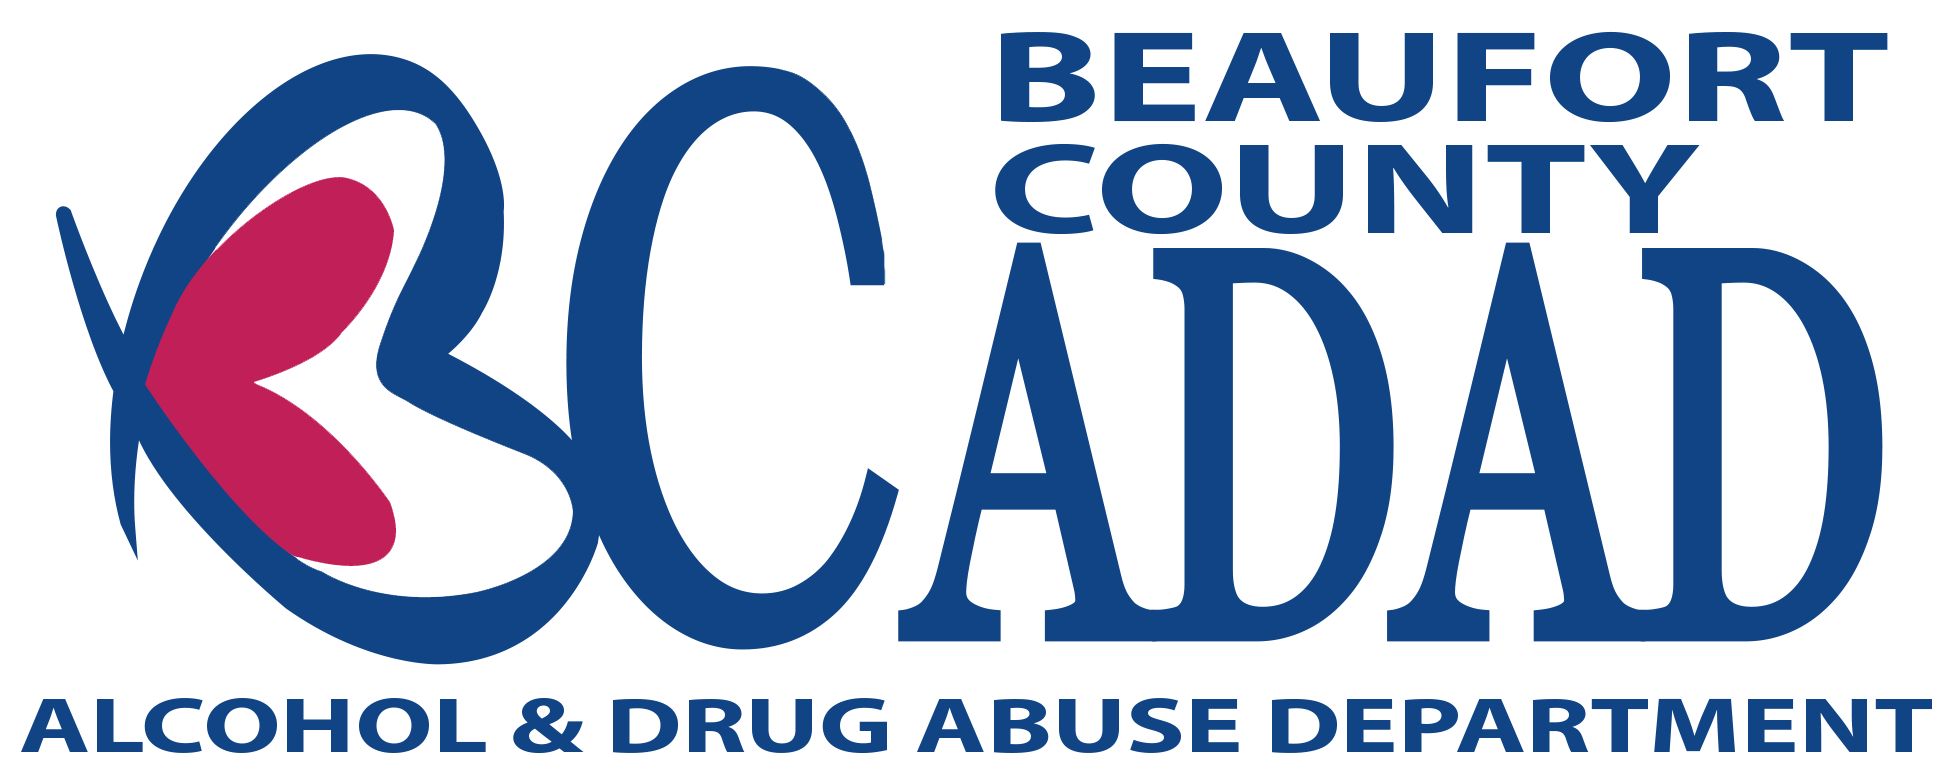 Beaufort County Alcohol and Drug Abuse Department Bluffton Location Closing Early Friday for Staff Training